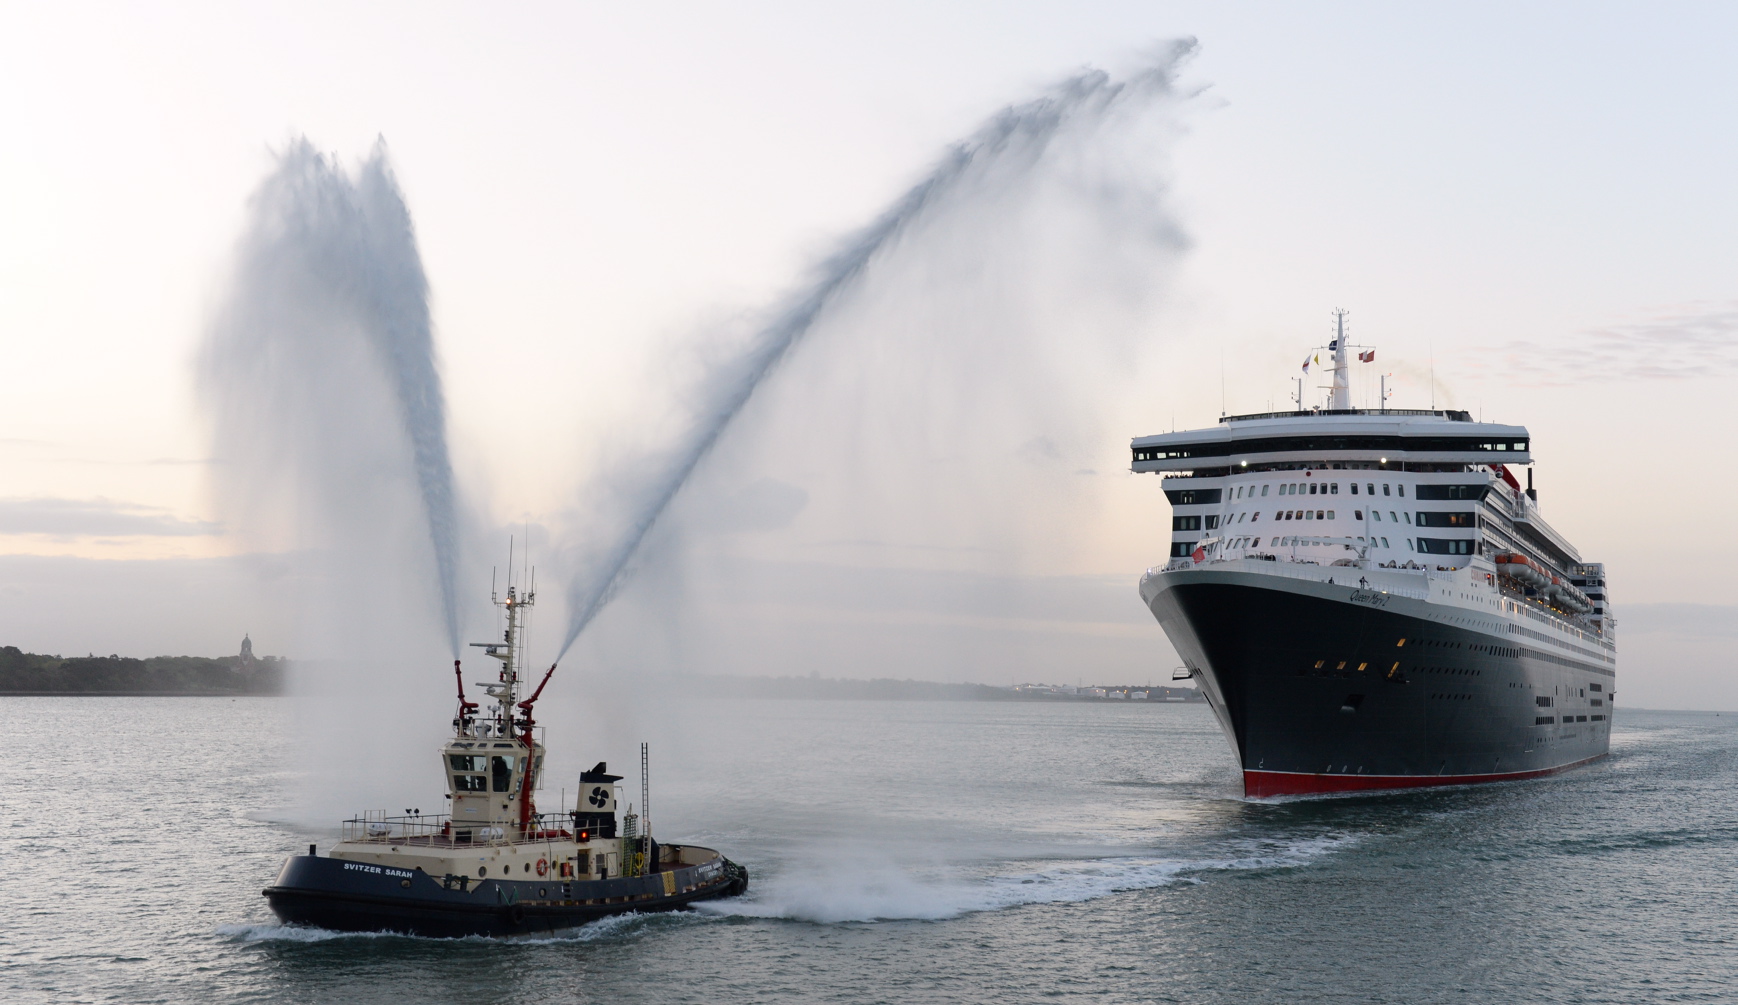 Queen Mary 2 Arrives in Southampton on her 10th Anniversary May 9 2014